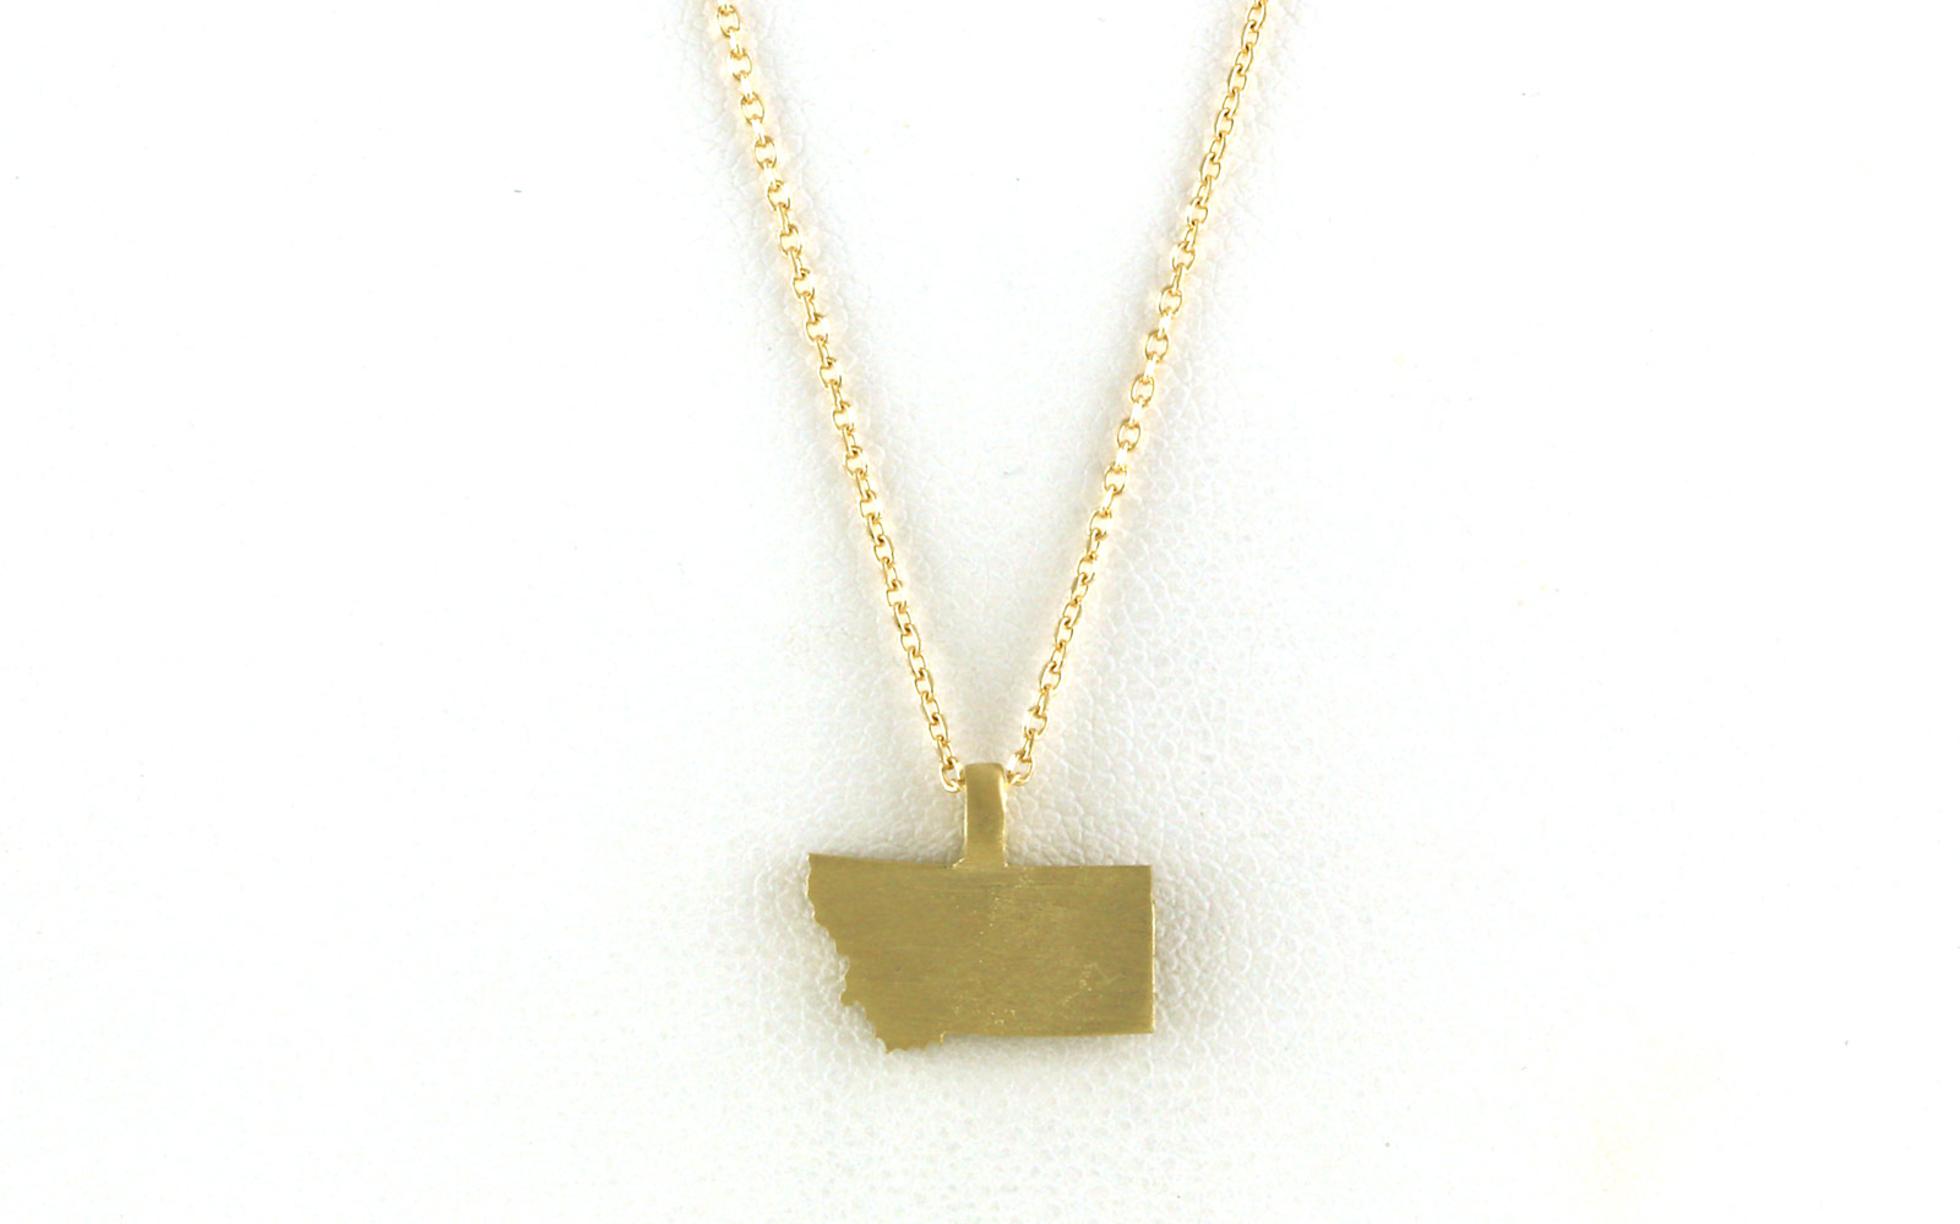 Satin-finish Montana Necklace in Yellow Gold